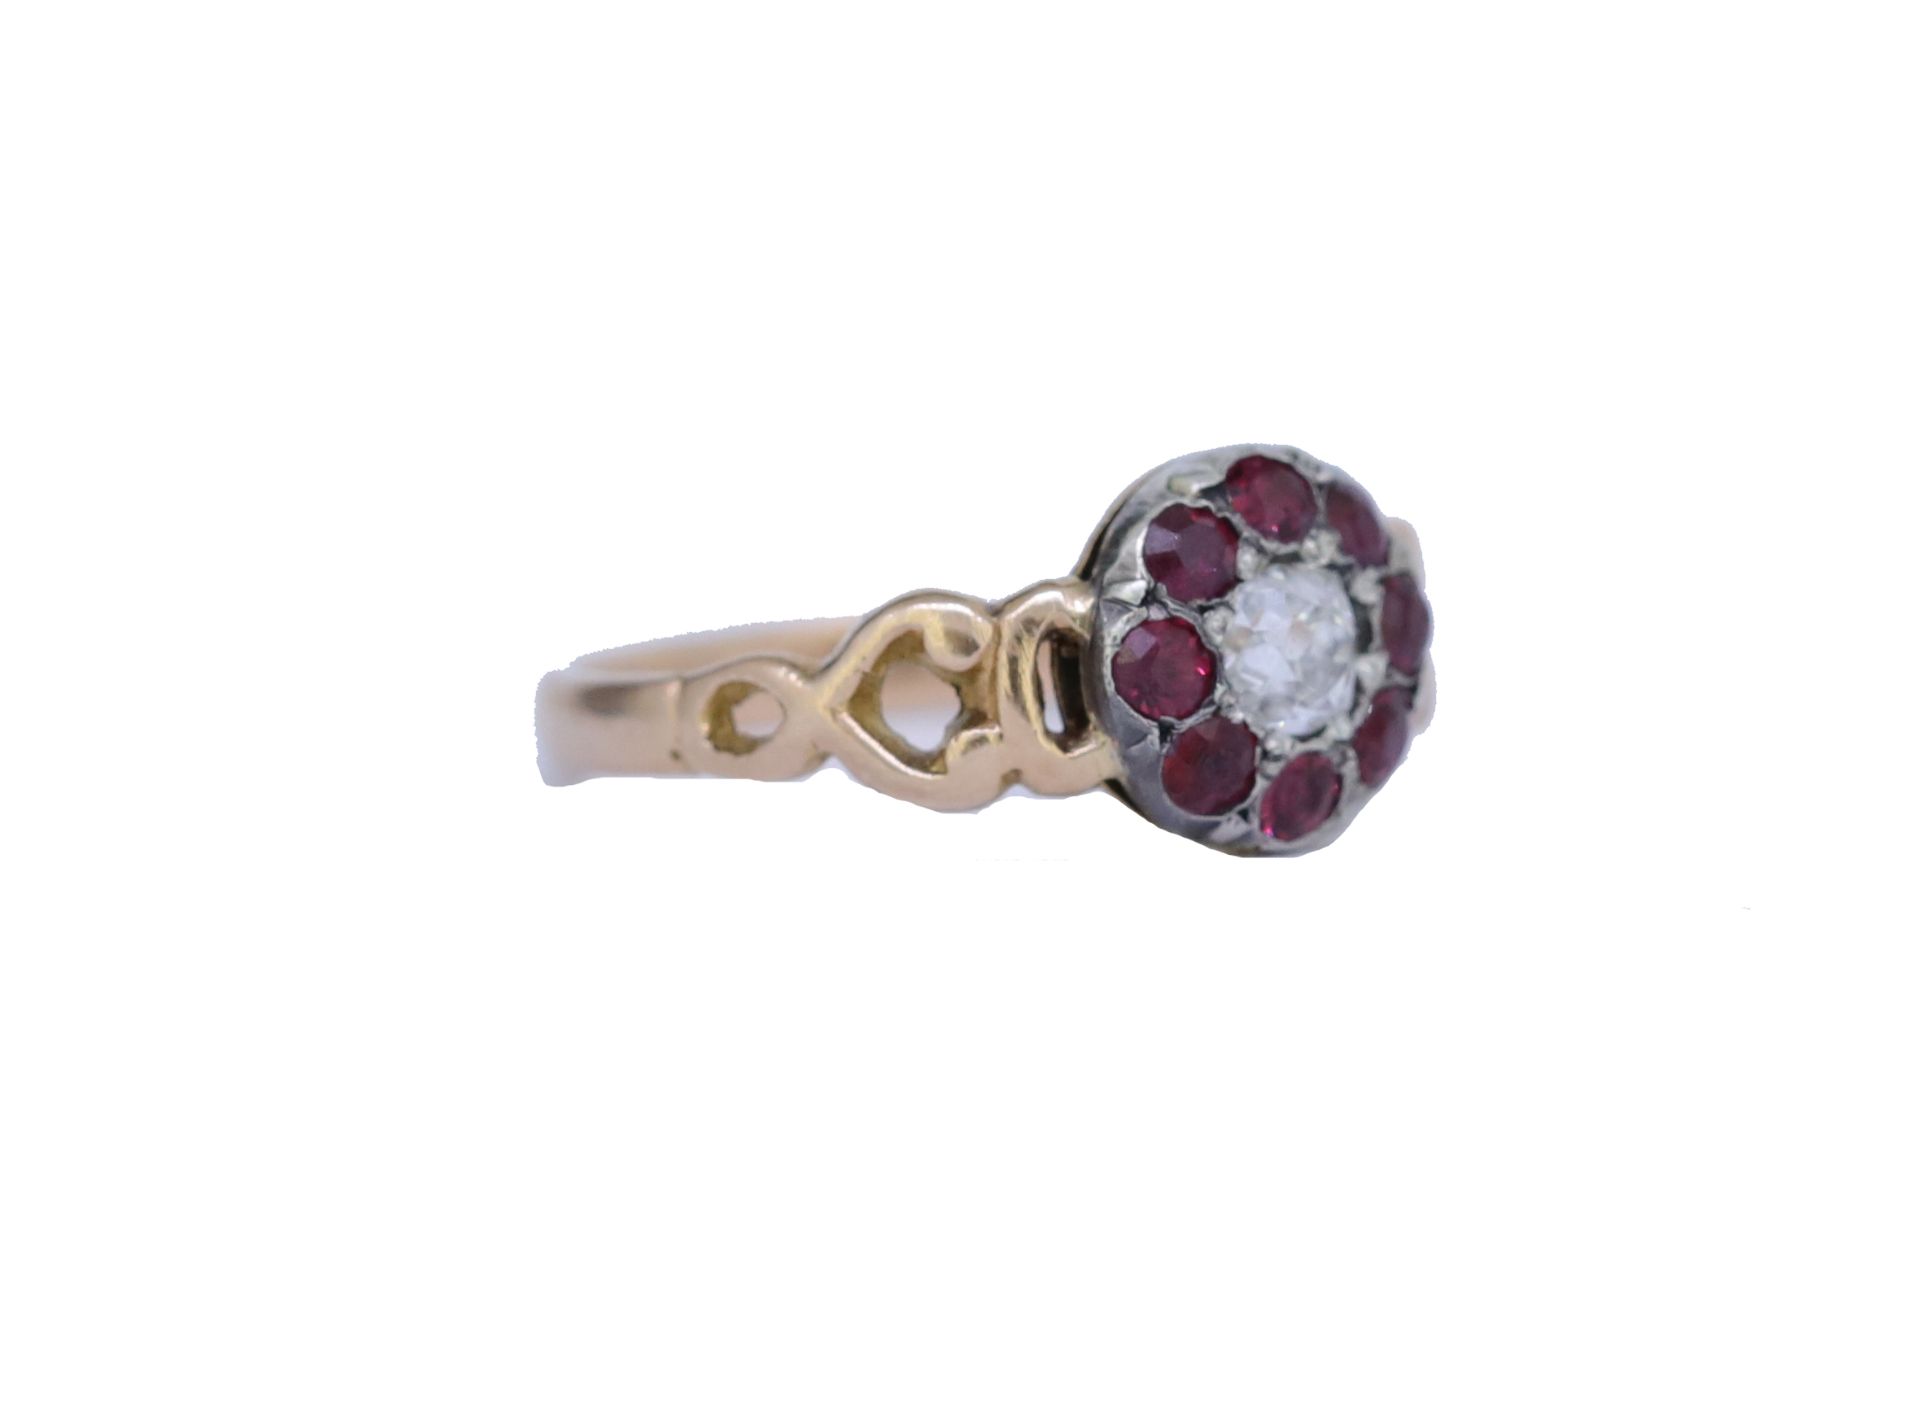 ANTIQUE RUBY AND DAIMOND CLUSTER RING - Image 2 of 4